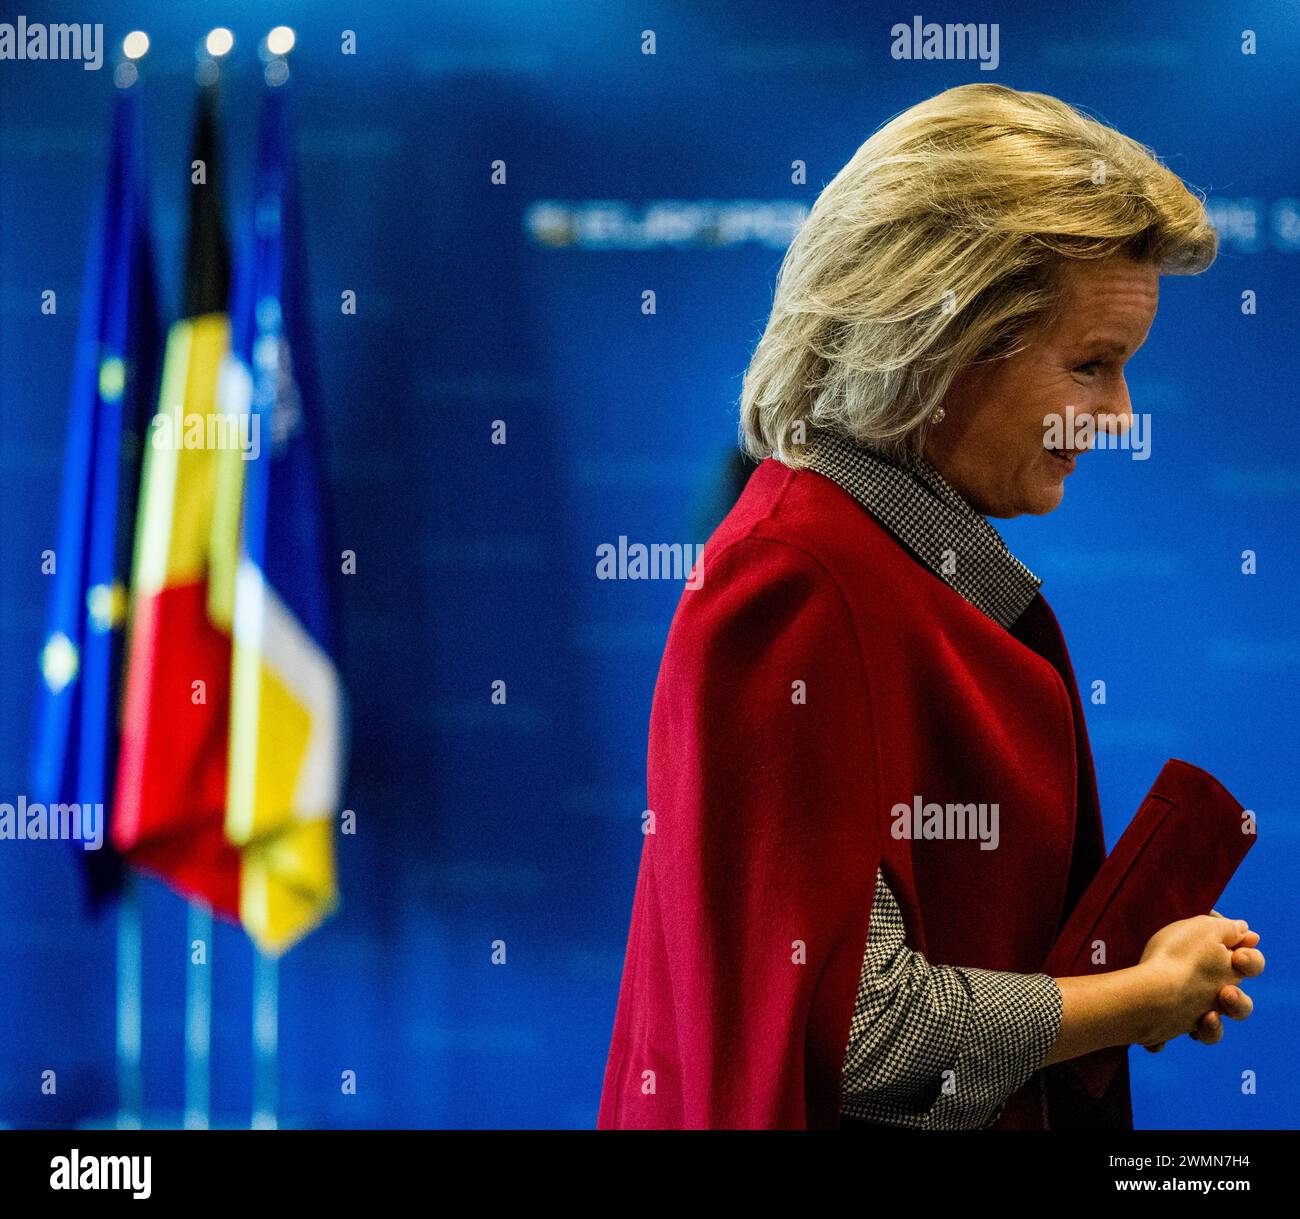 The Hague, Netherlands. 27th Feb, 2024. Queen Mathilde of Belgium pictured during a royal visit to the Europol headquarters in The Hague, the Netherlands, Tuesday 27 February 2024. Europol is the European police agency tasked with helping the Member States of the European Union to prevent and combat all forms of serious organised and international crime, cybercrime and terrorism. Credit: Belga News Agency/Alamy Live News Stock Photo